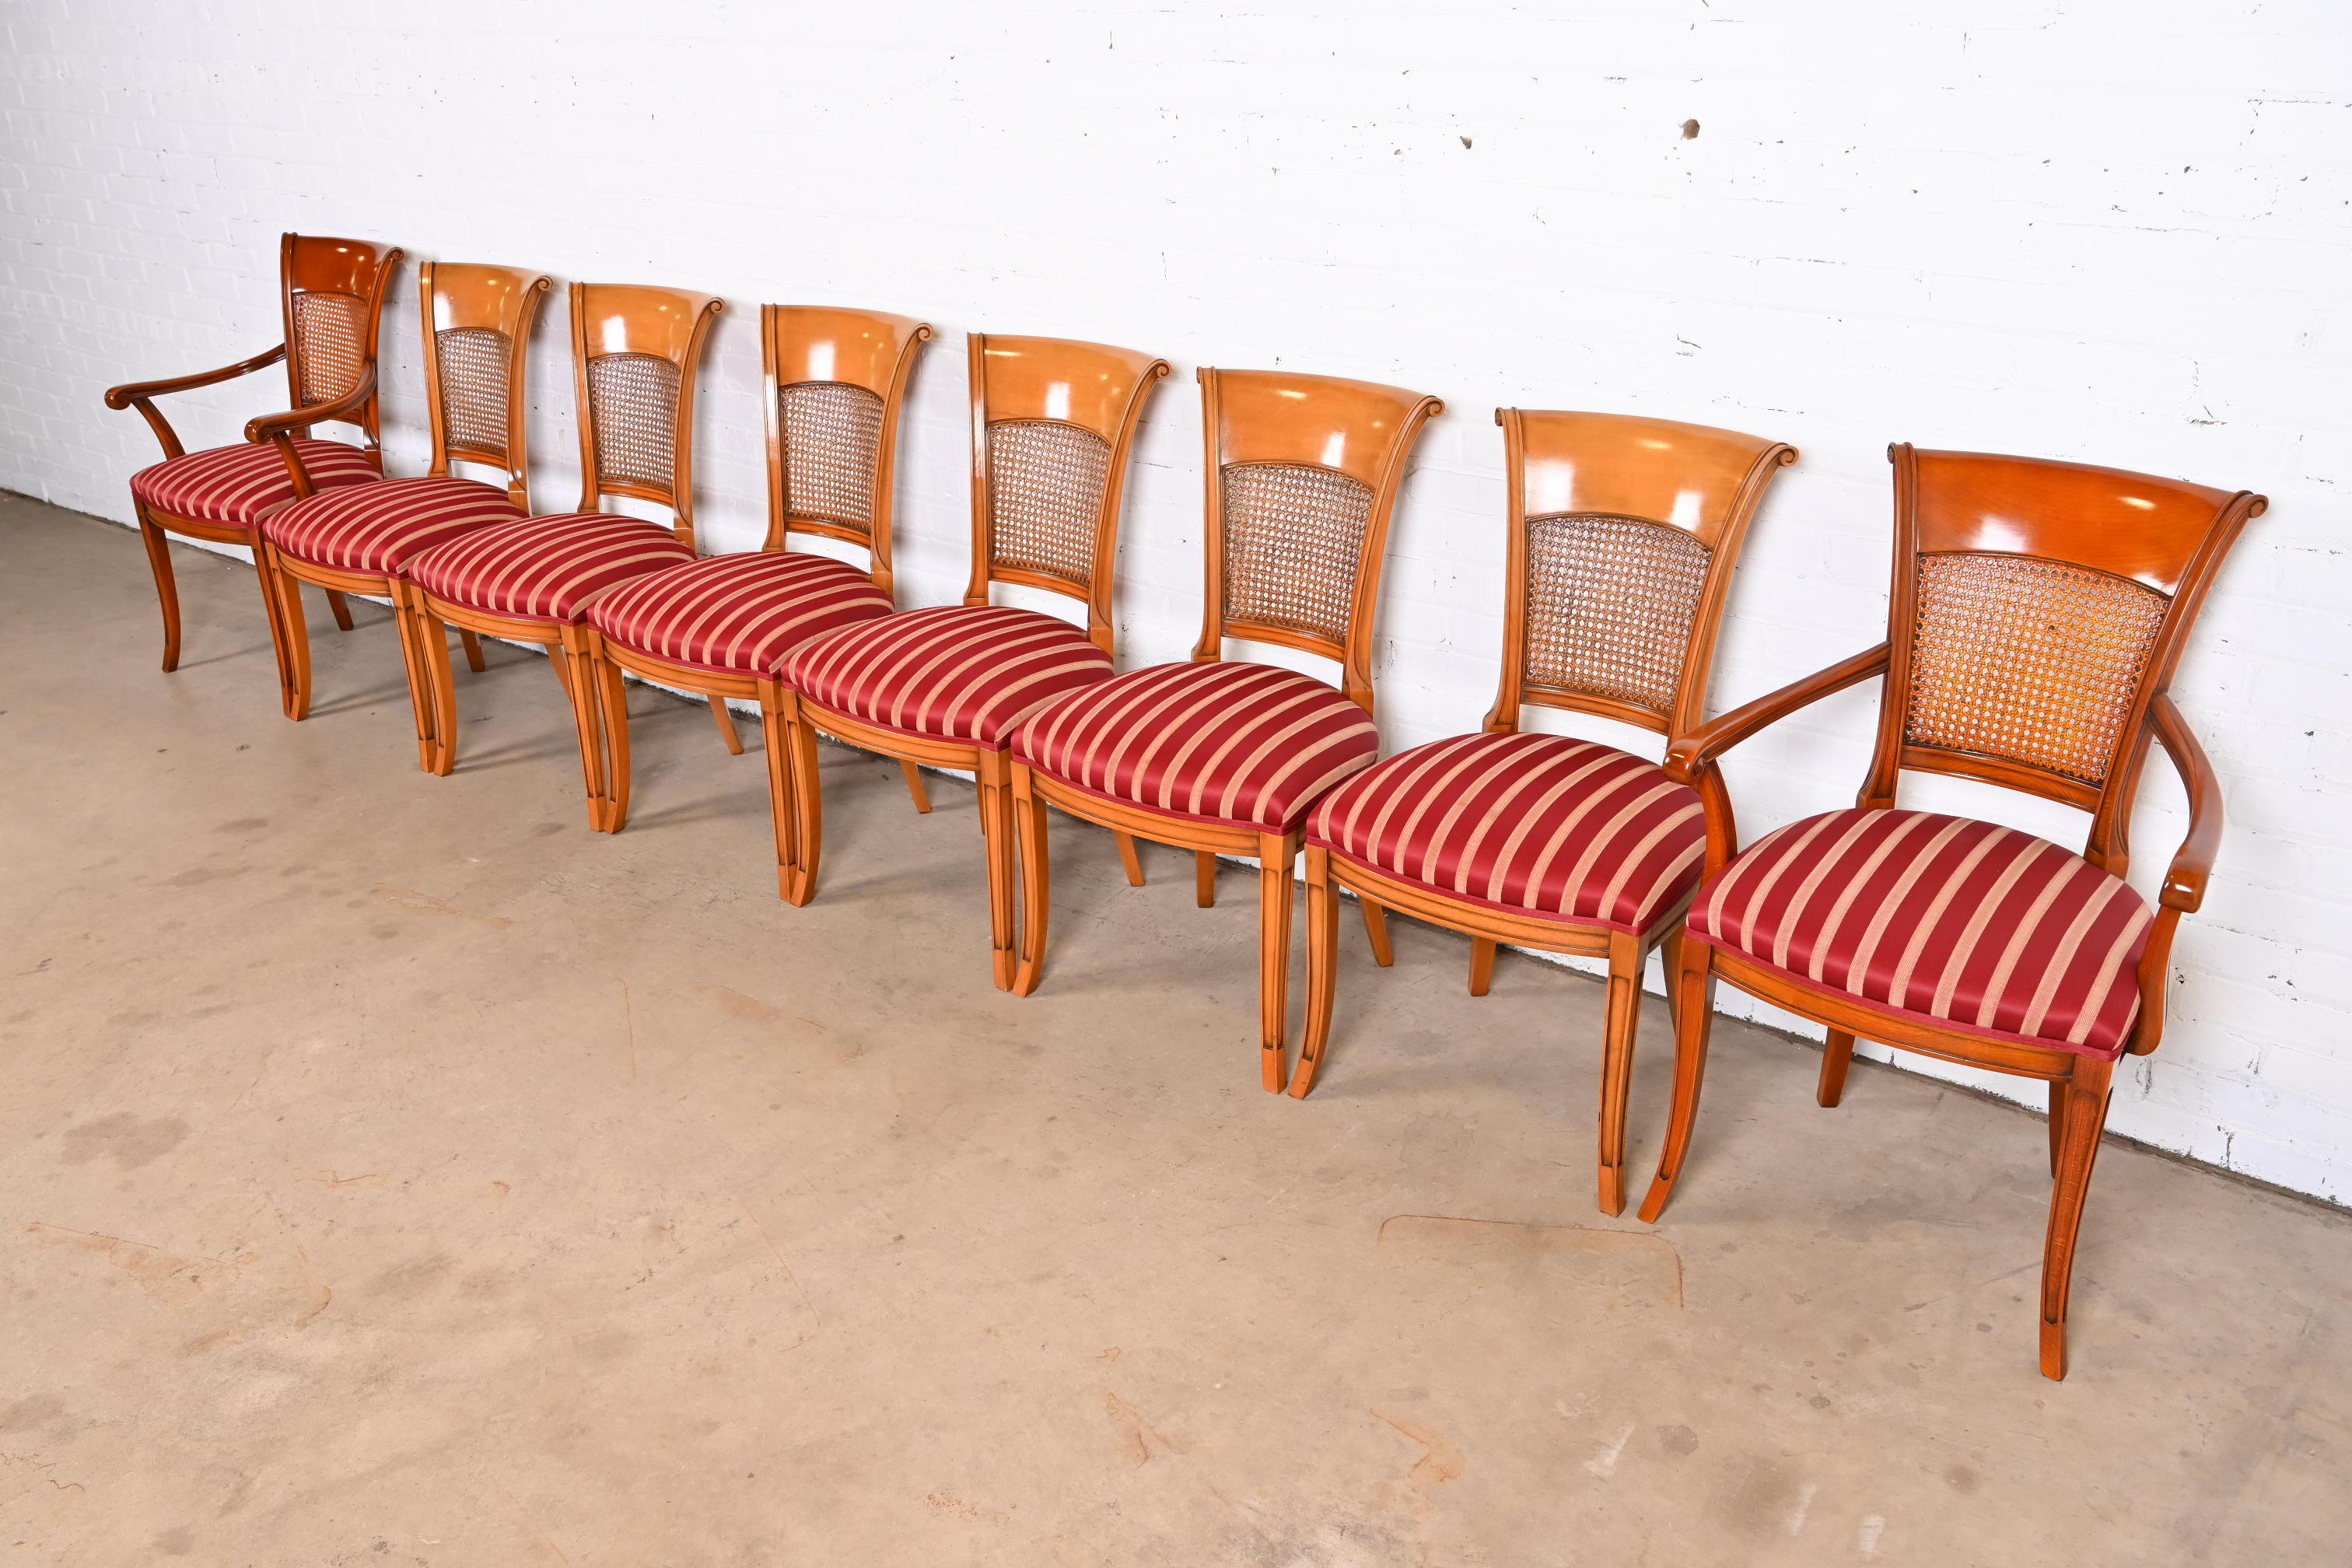 20th Century Italian Neoclassical Fruitwood Dining Chairs, Set of Eight